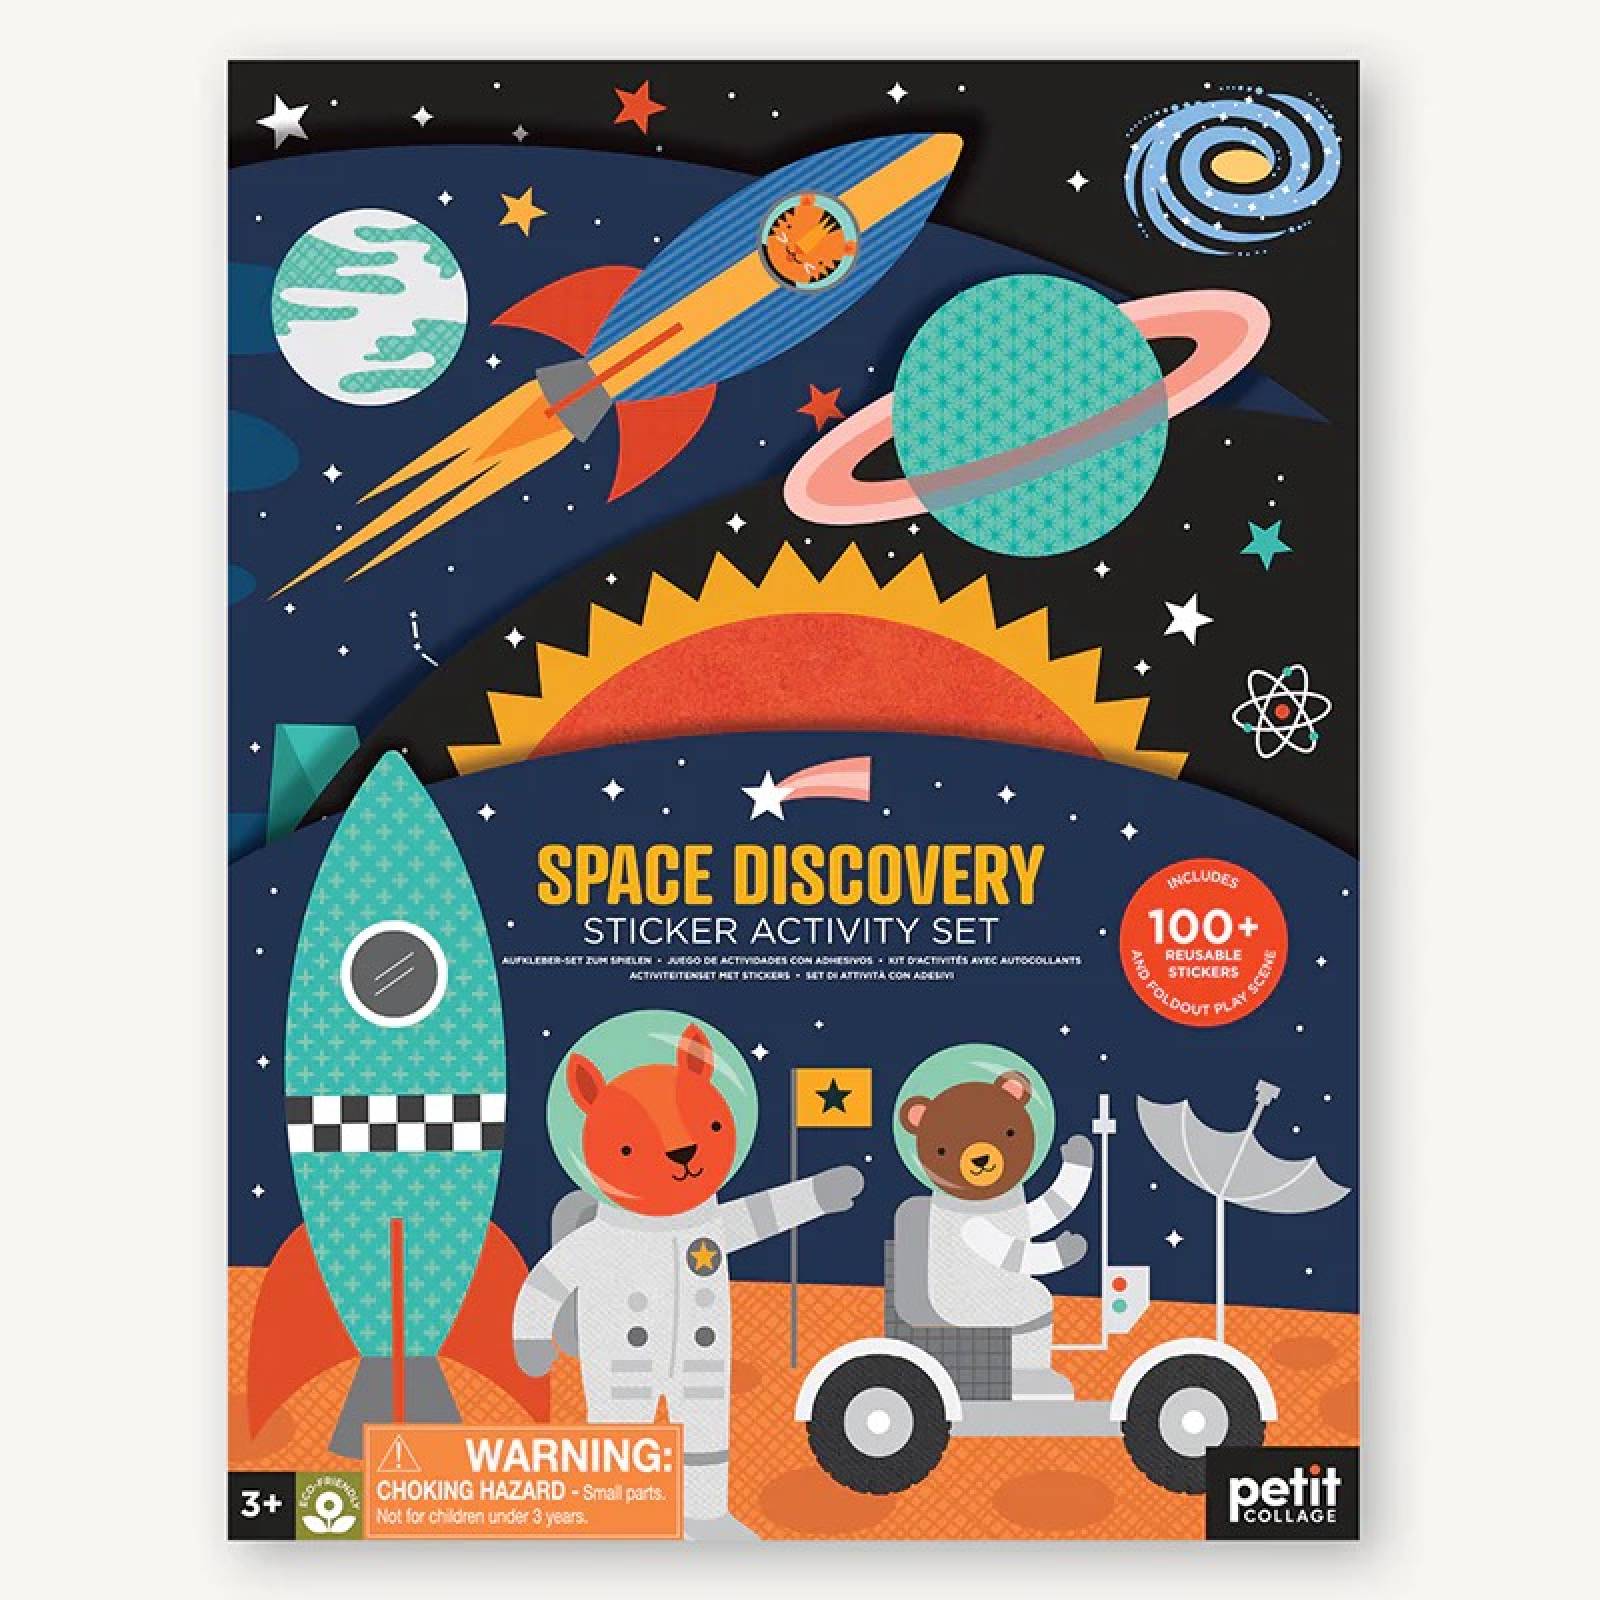 Space Discovery Sticker Activity Set 4+